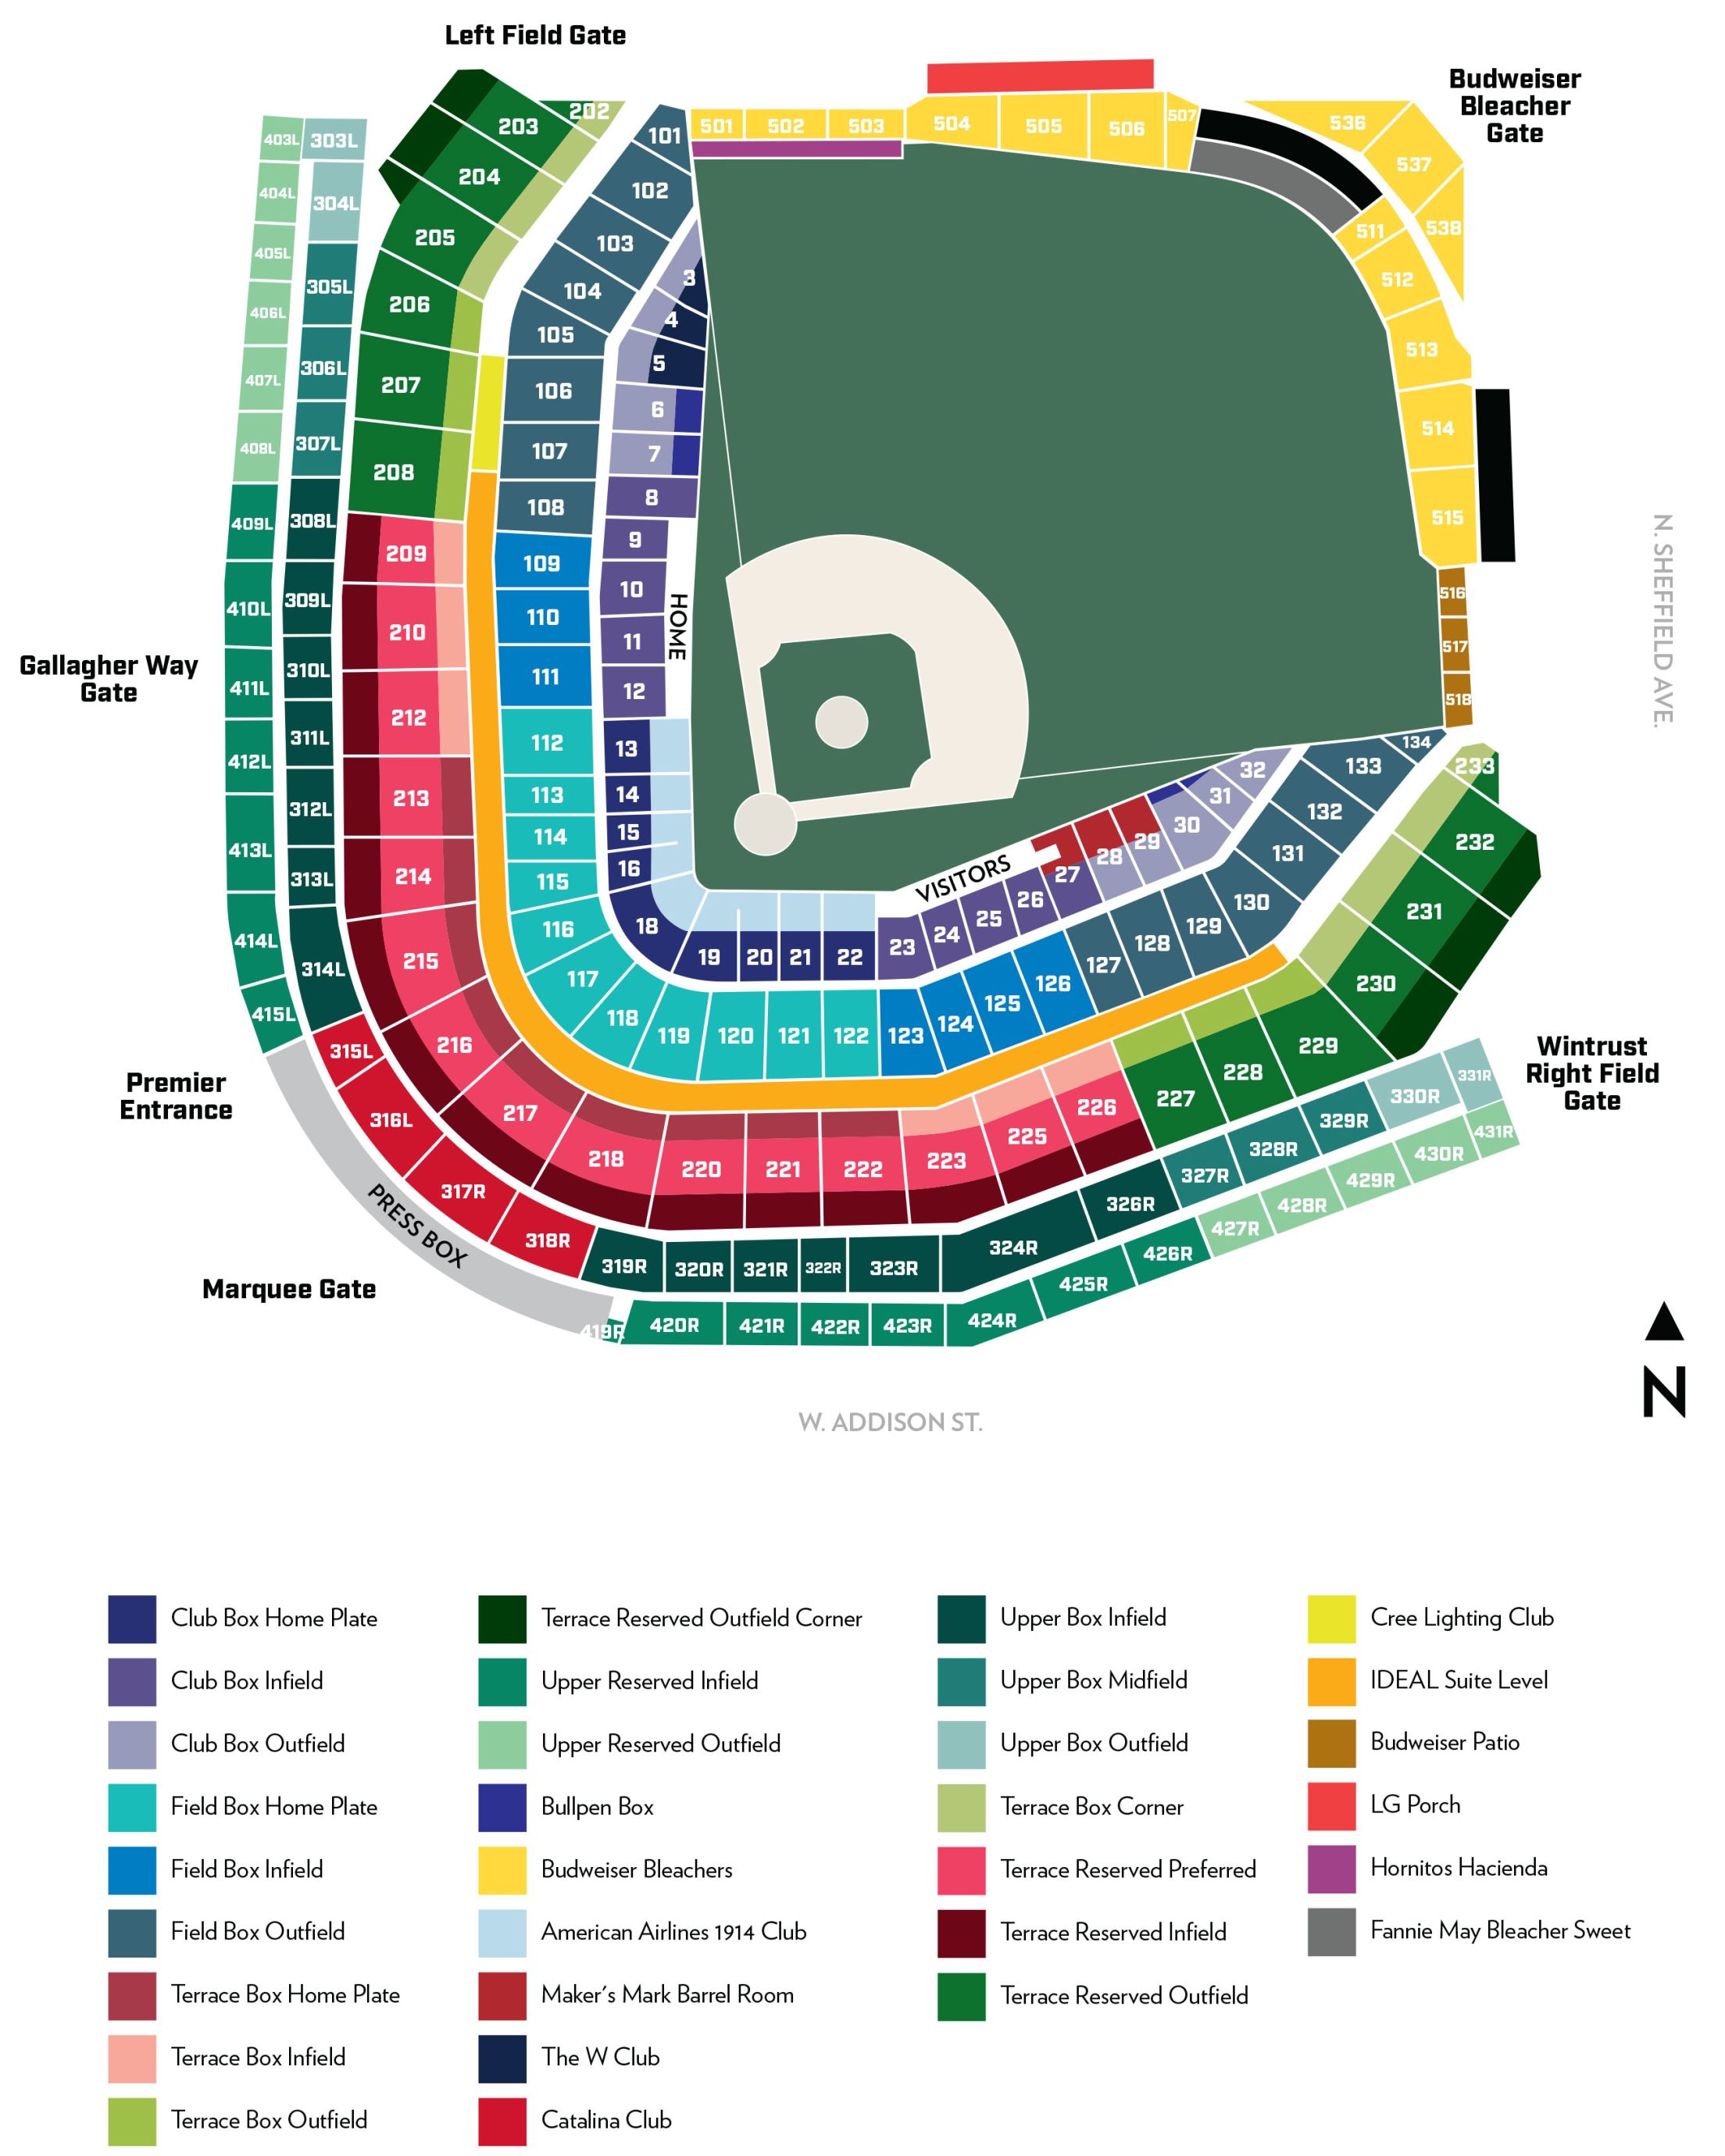 Wrigley Field Seat Mounting Floor Stands